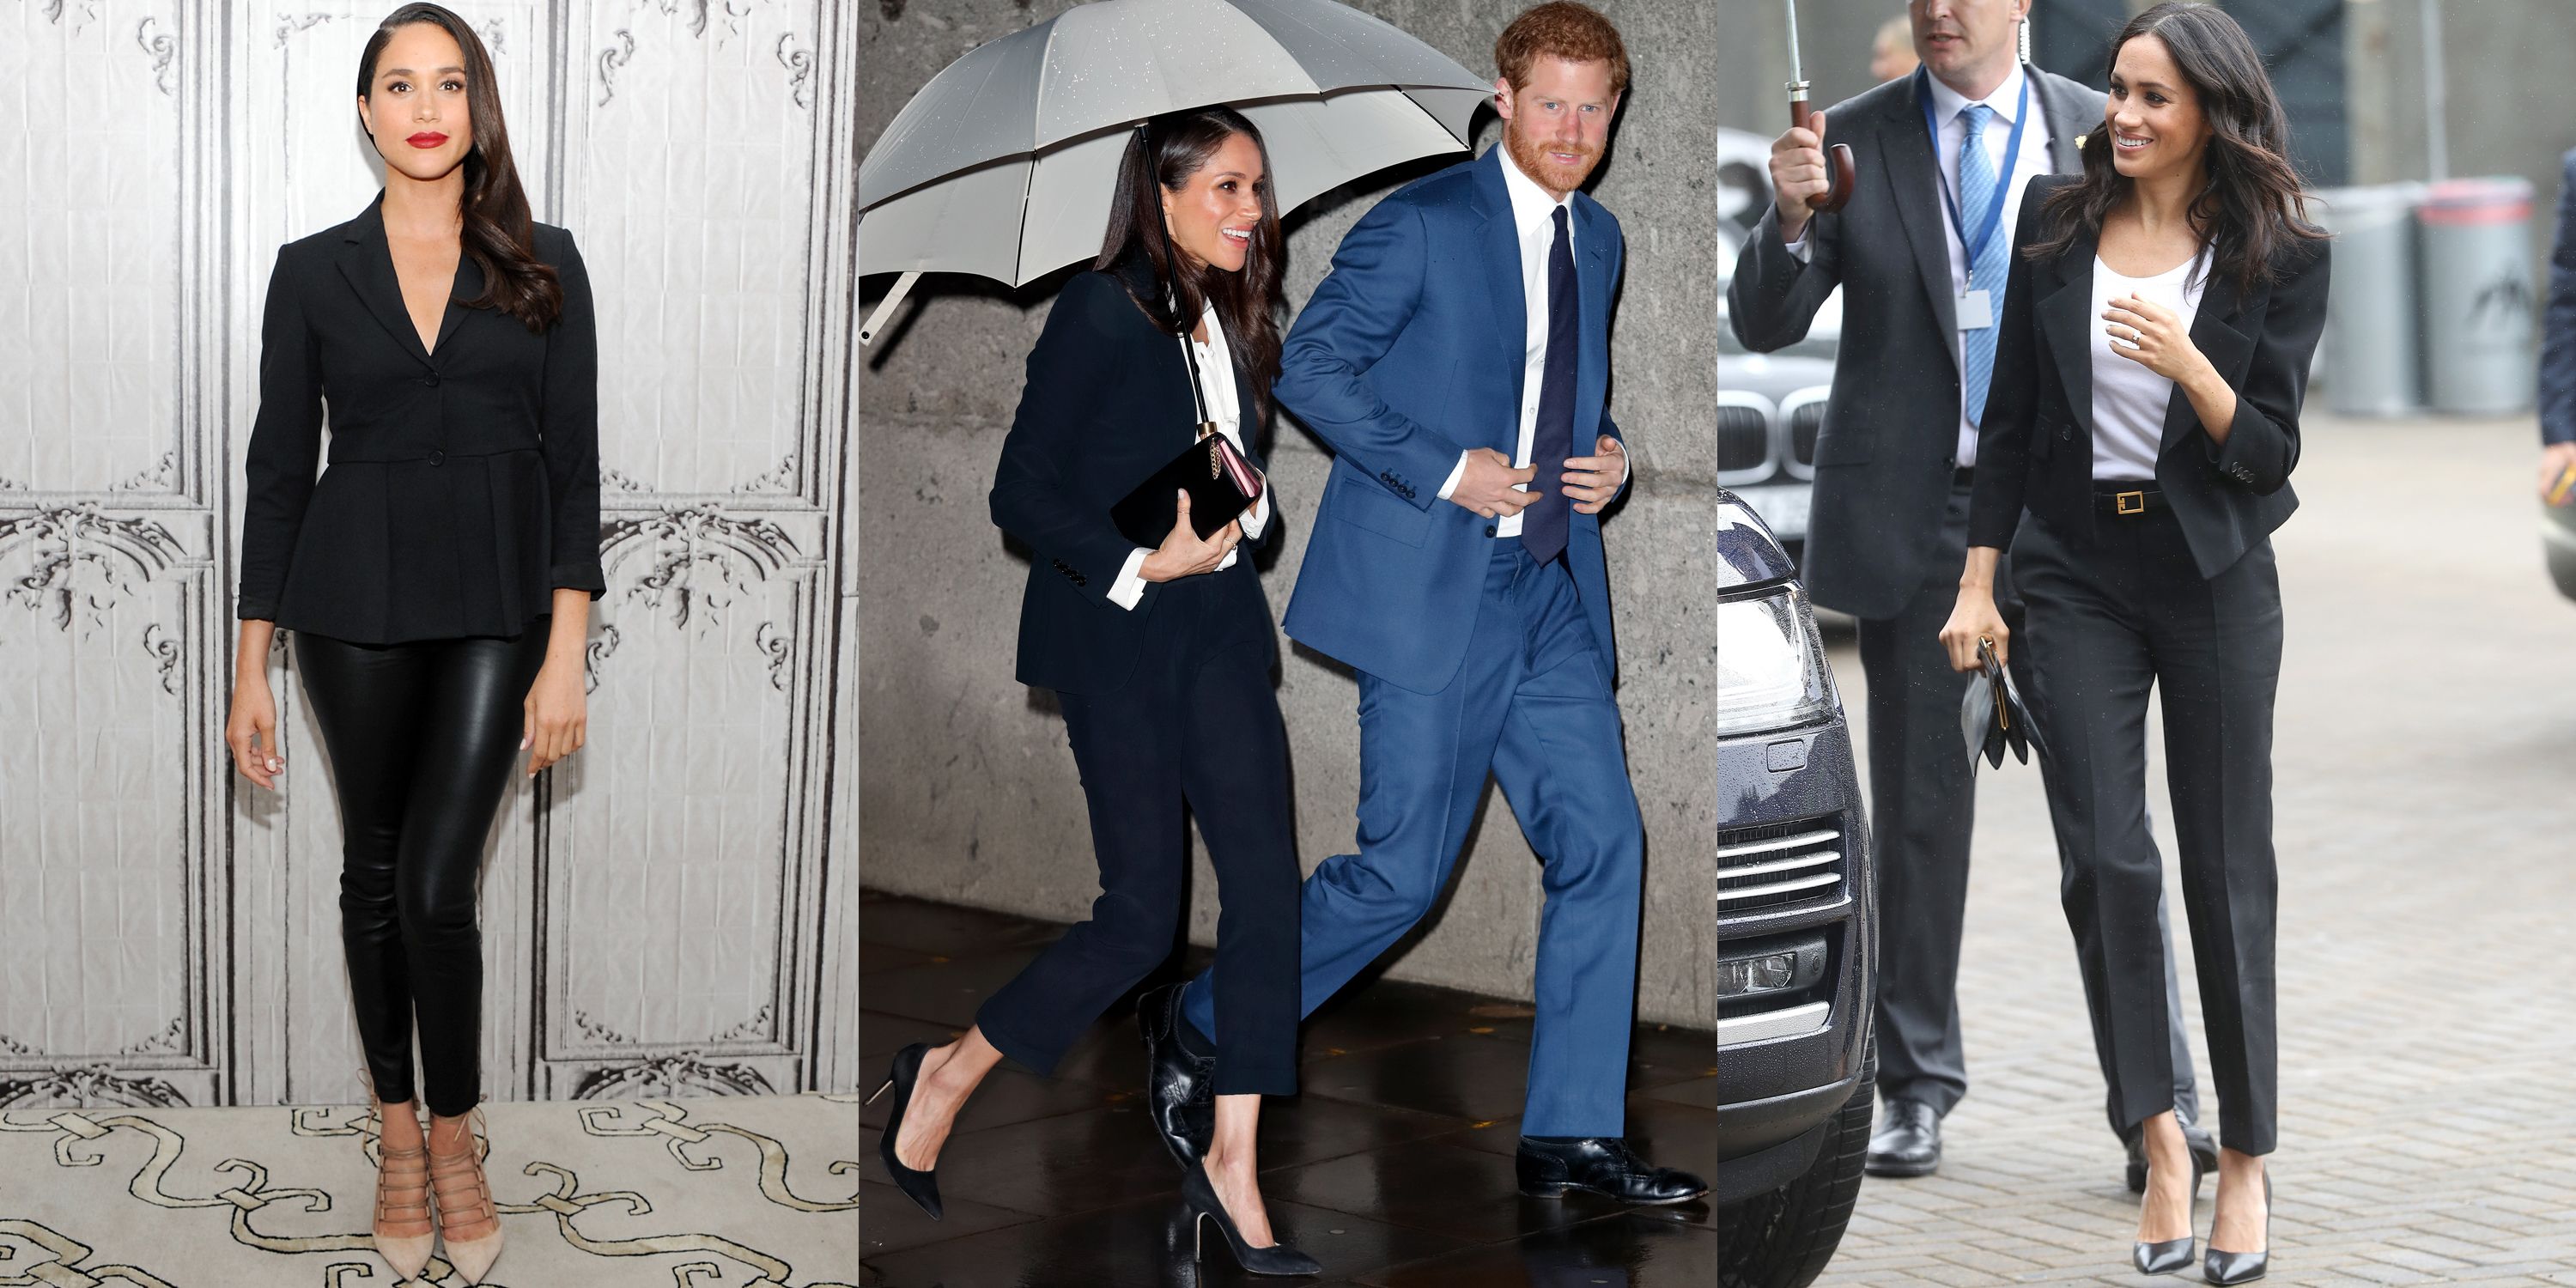 Meghan Markle Wears Chic Pantsuit for Night Out with Prince Harry: Photo  4025601 | Meghan Markle, Prince Harry Photos | Just Jared: Entertainment  News